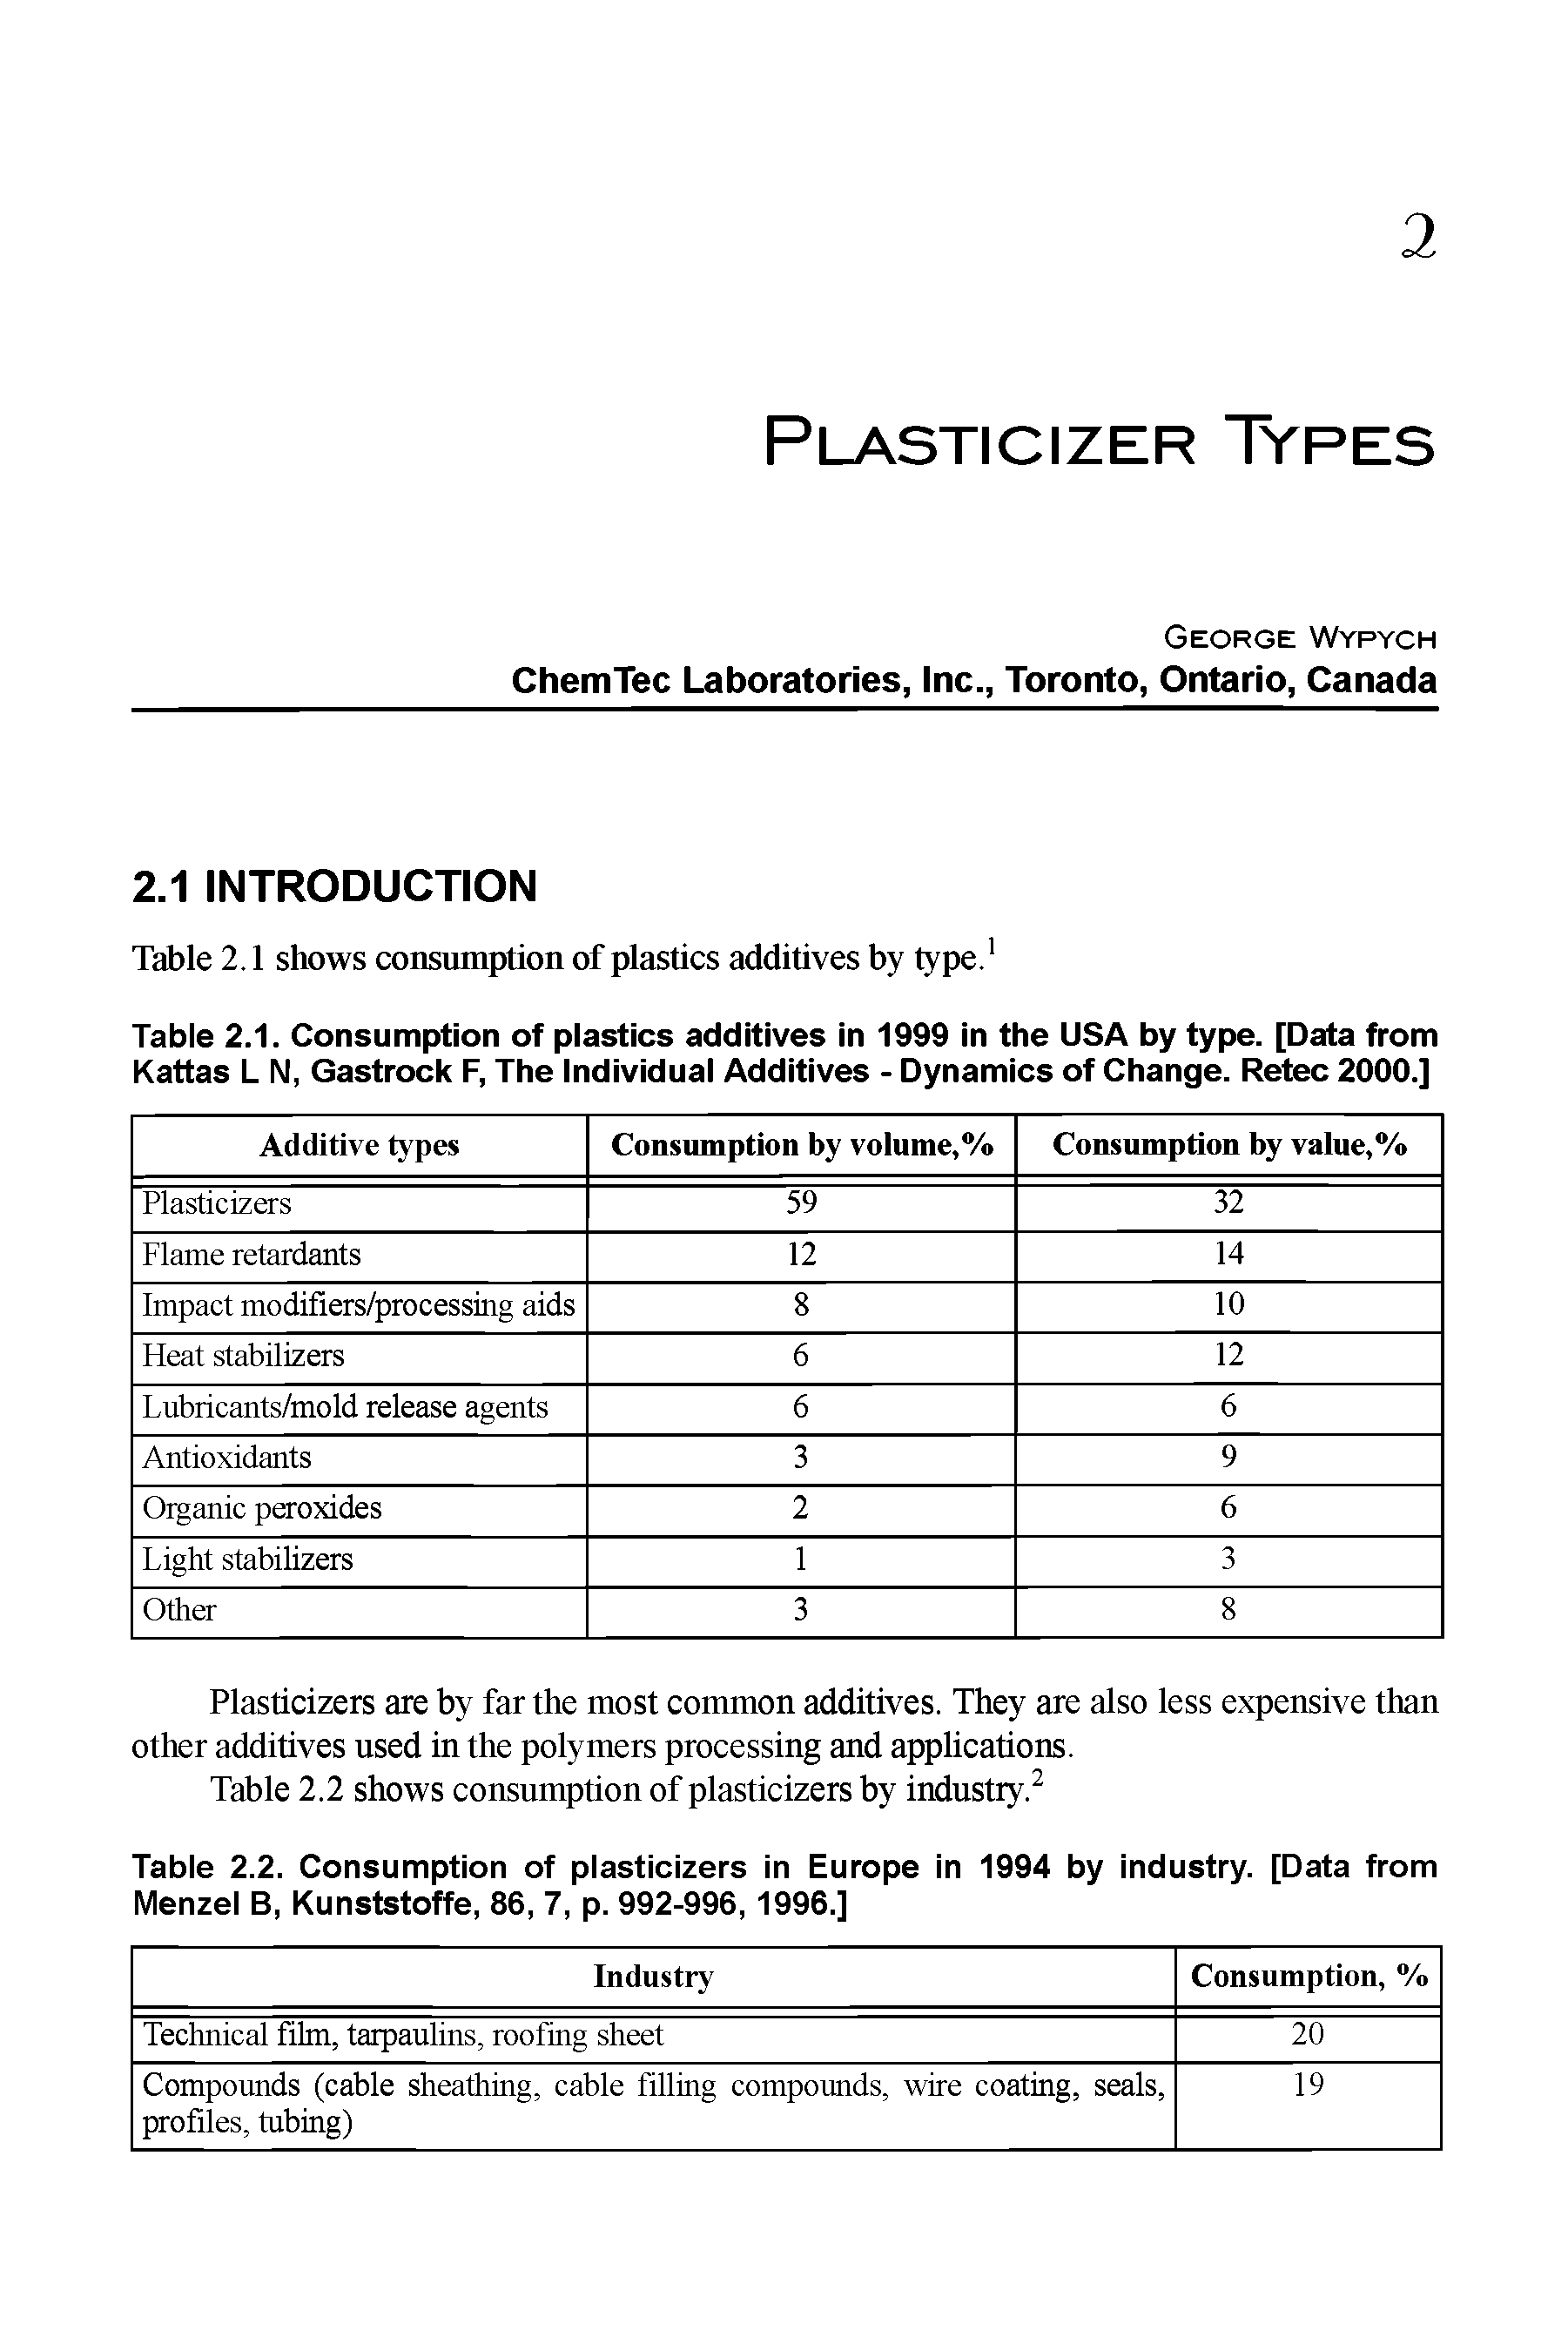 Table 2.1. Consumption of plastics additives in 1999 in the USA by type. [Data from Kattas L N, Gastrock F, The Individual Additives - Dynamics of Change. Retec 2000.]...